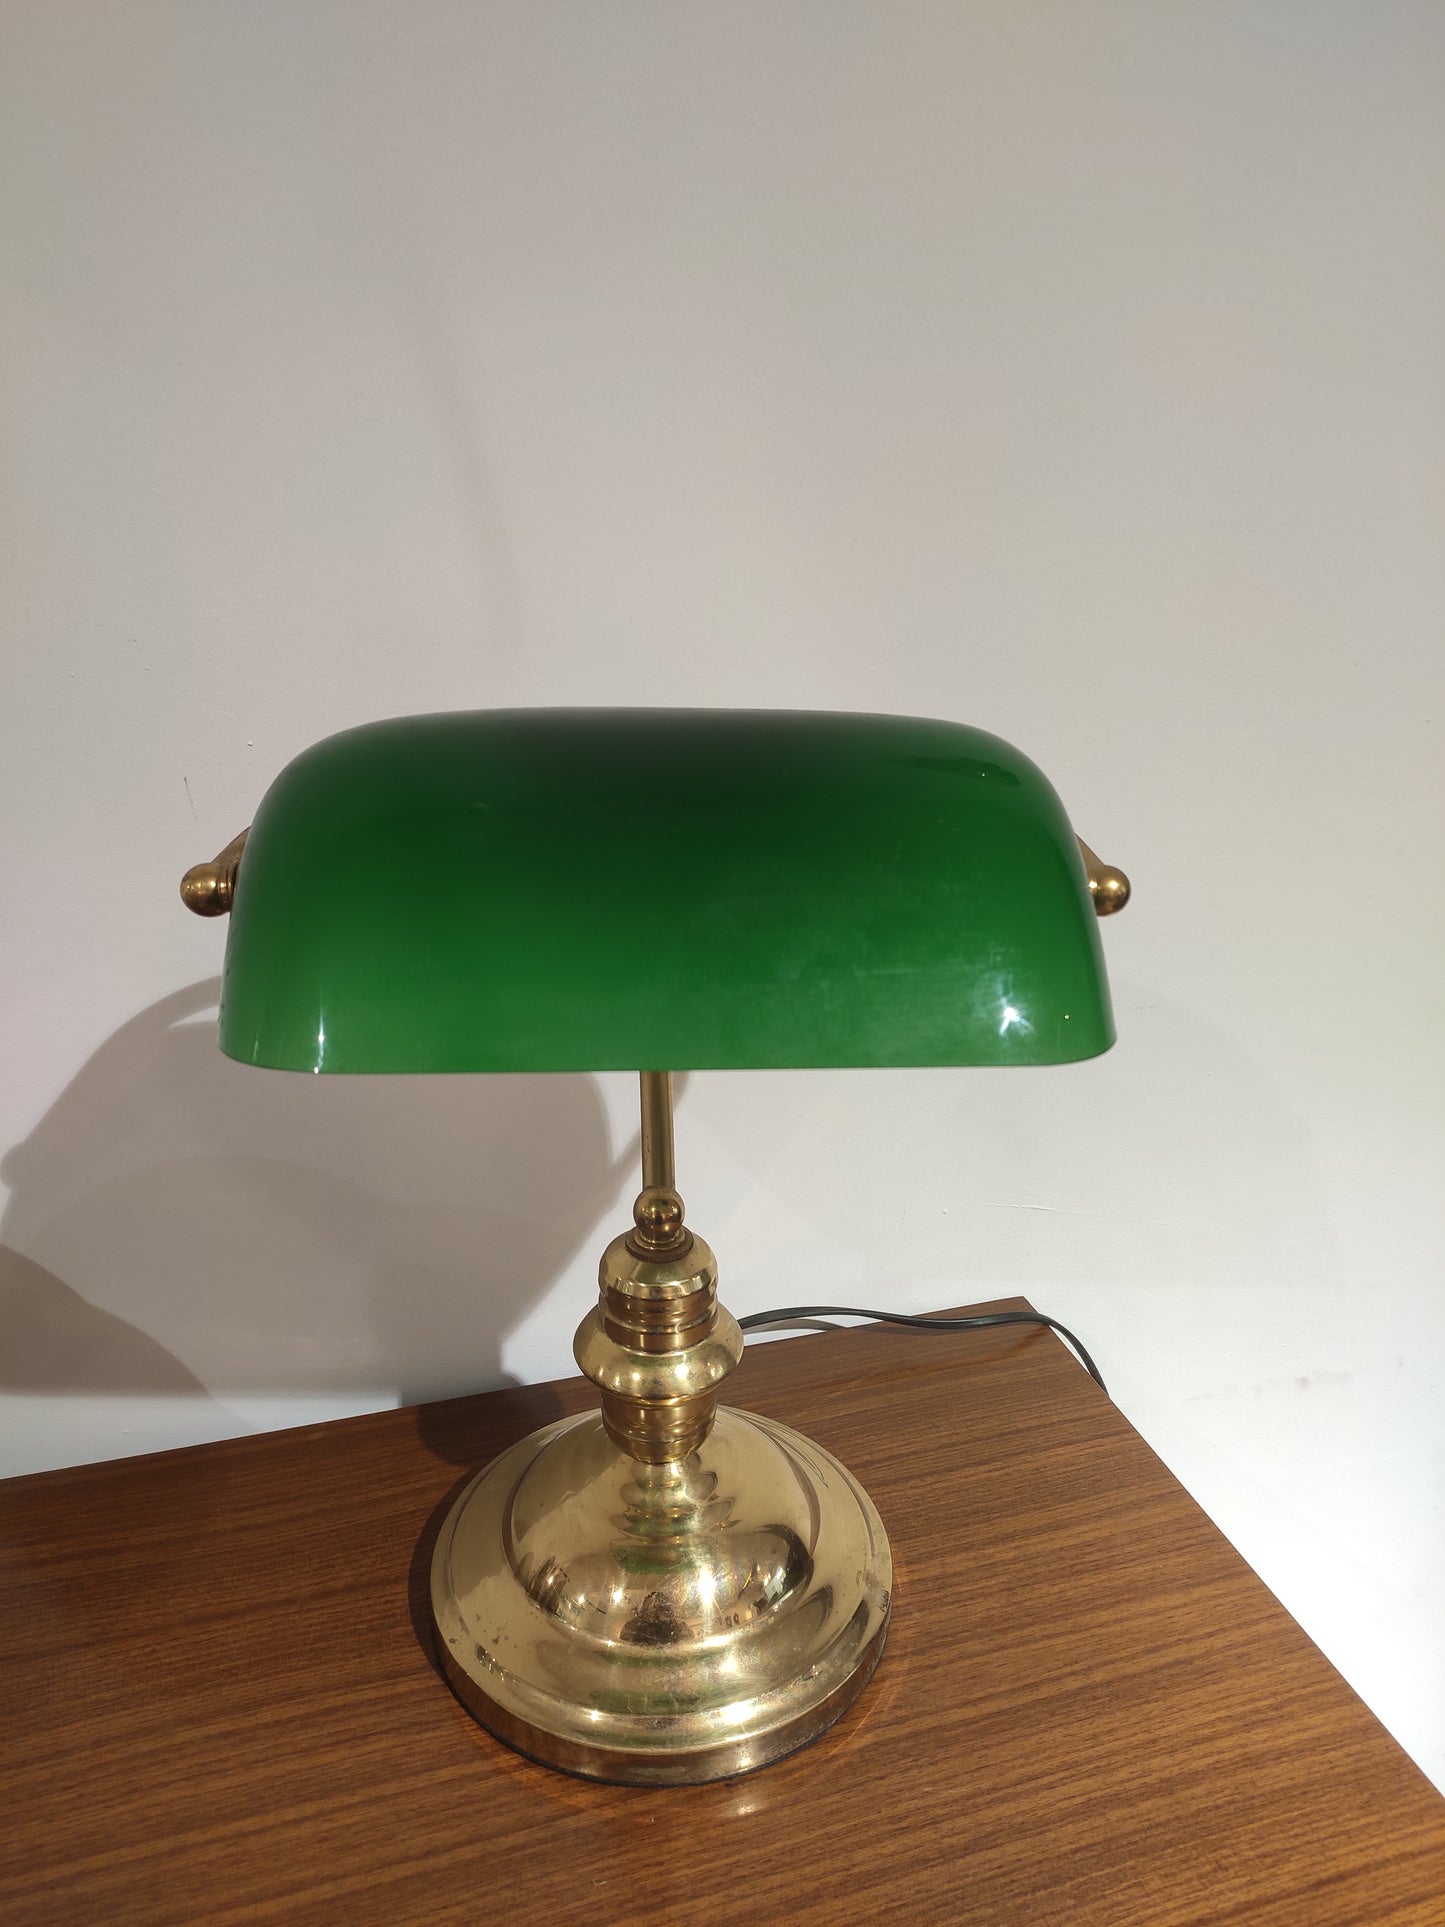 Vintage Banker lamp with curved stand